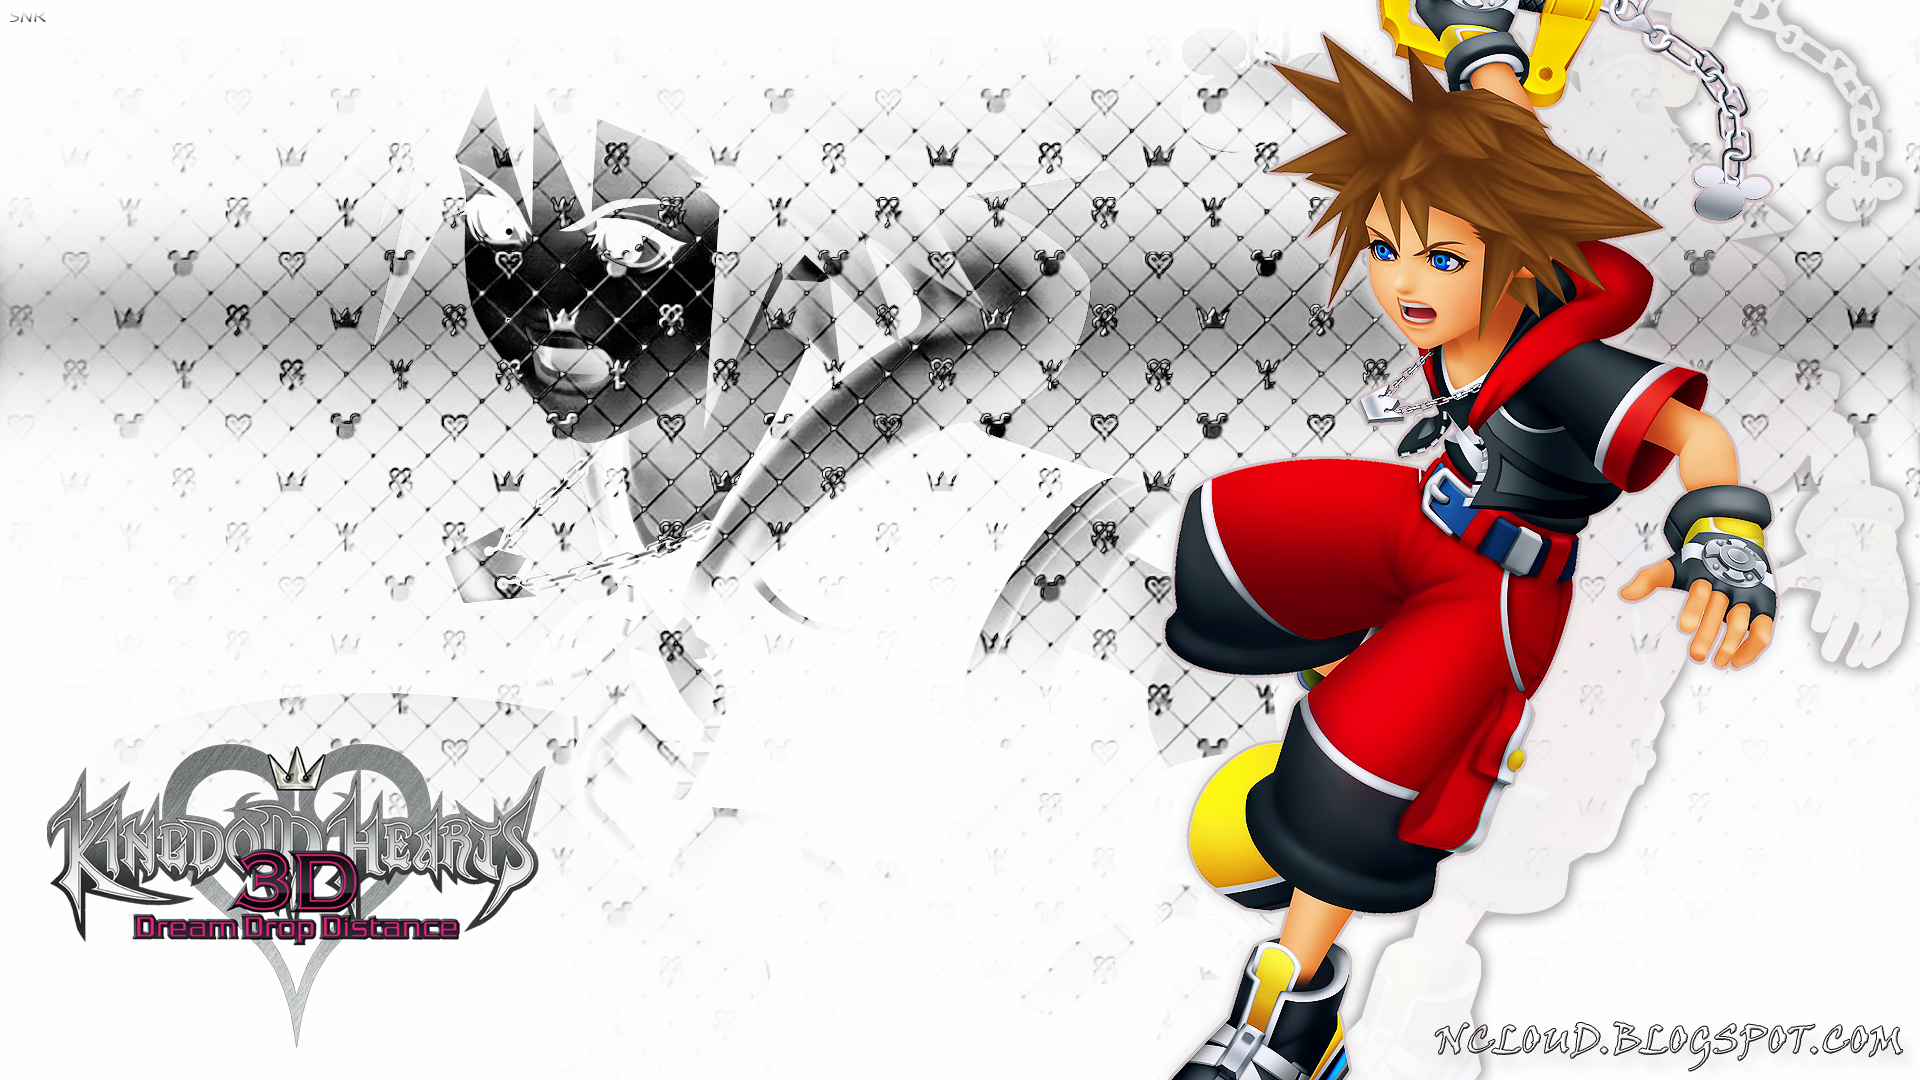 kingdom hearts 3 sora on side with white background hd games Wallpapers   HD Wallpapers  ID 42920